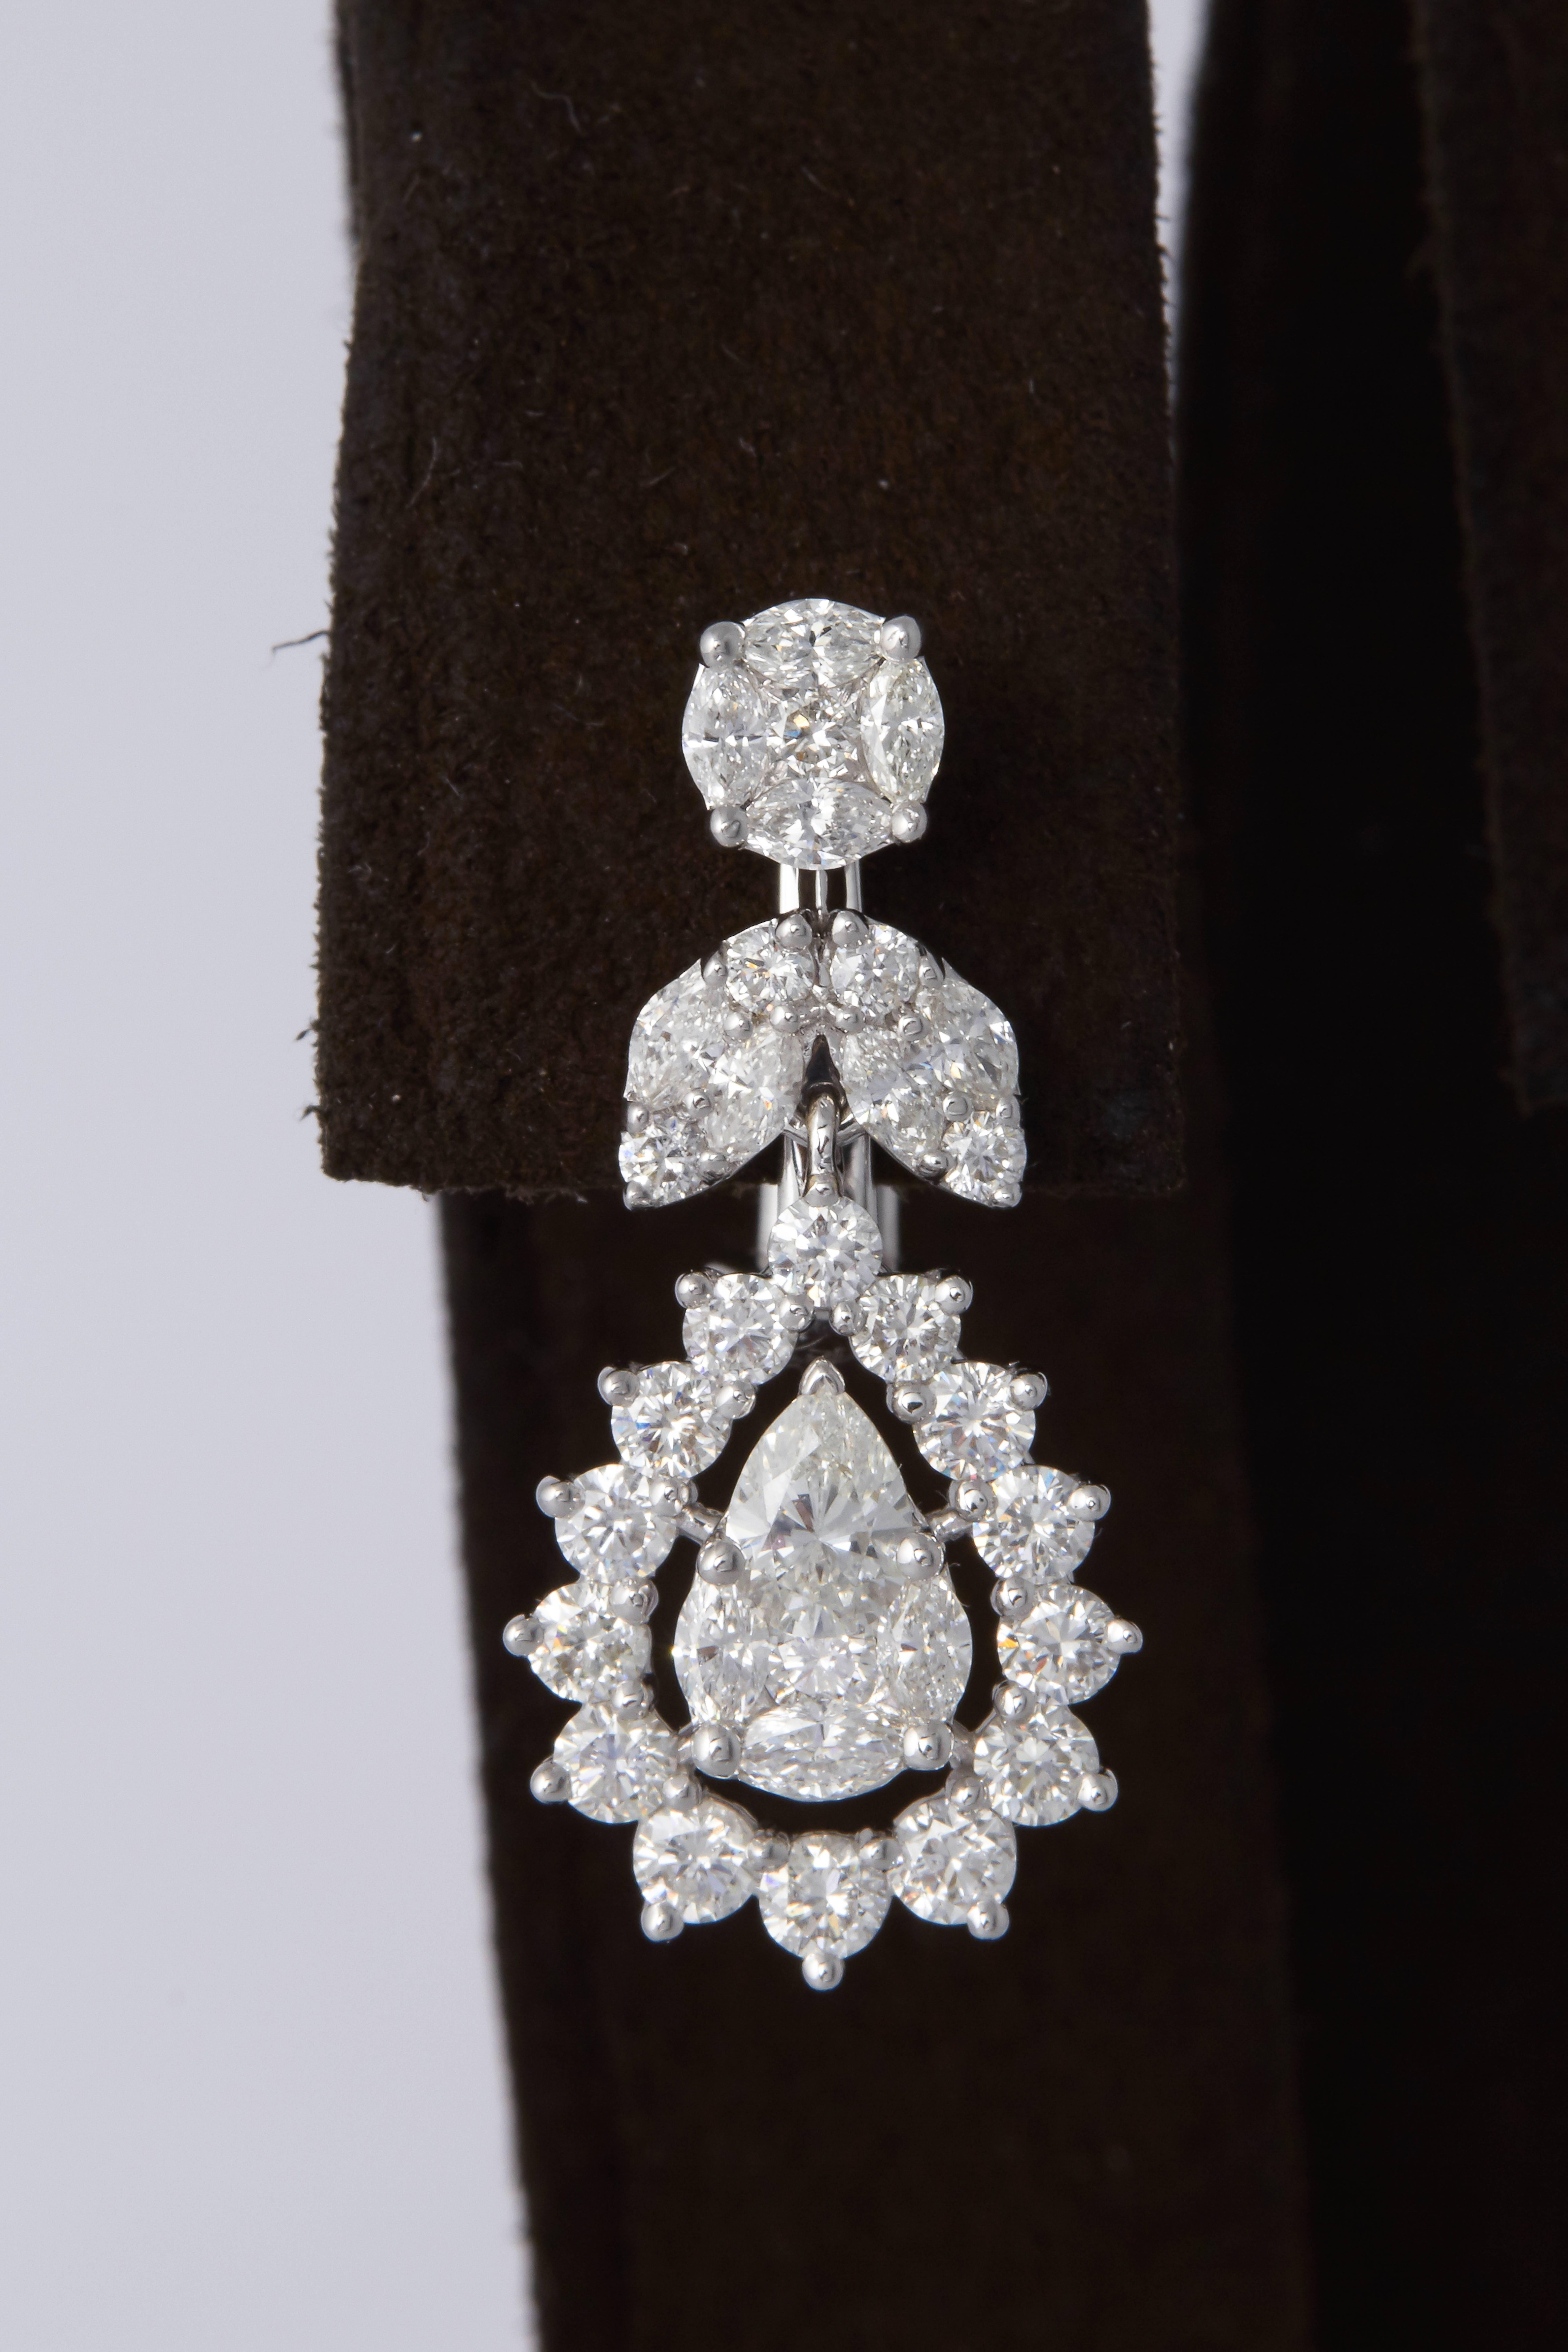 

An elegant earring that shines alone or will compliment other pieces of jewelry in your own collection.

2.84 carats of F-G color VS clarity diamonds set in 18k white gold. 

The earring is made up of special cut diamonds that create the illusion